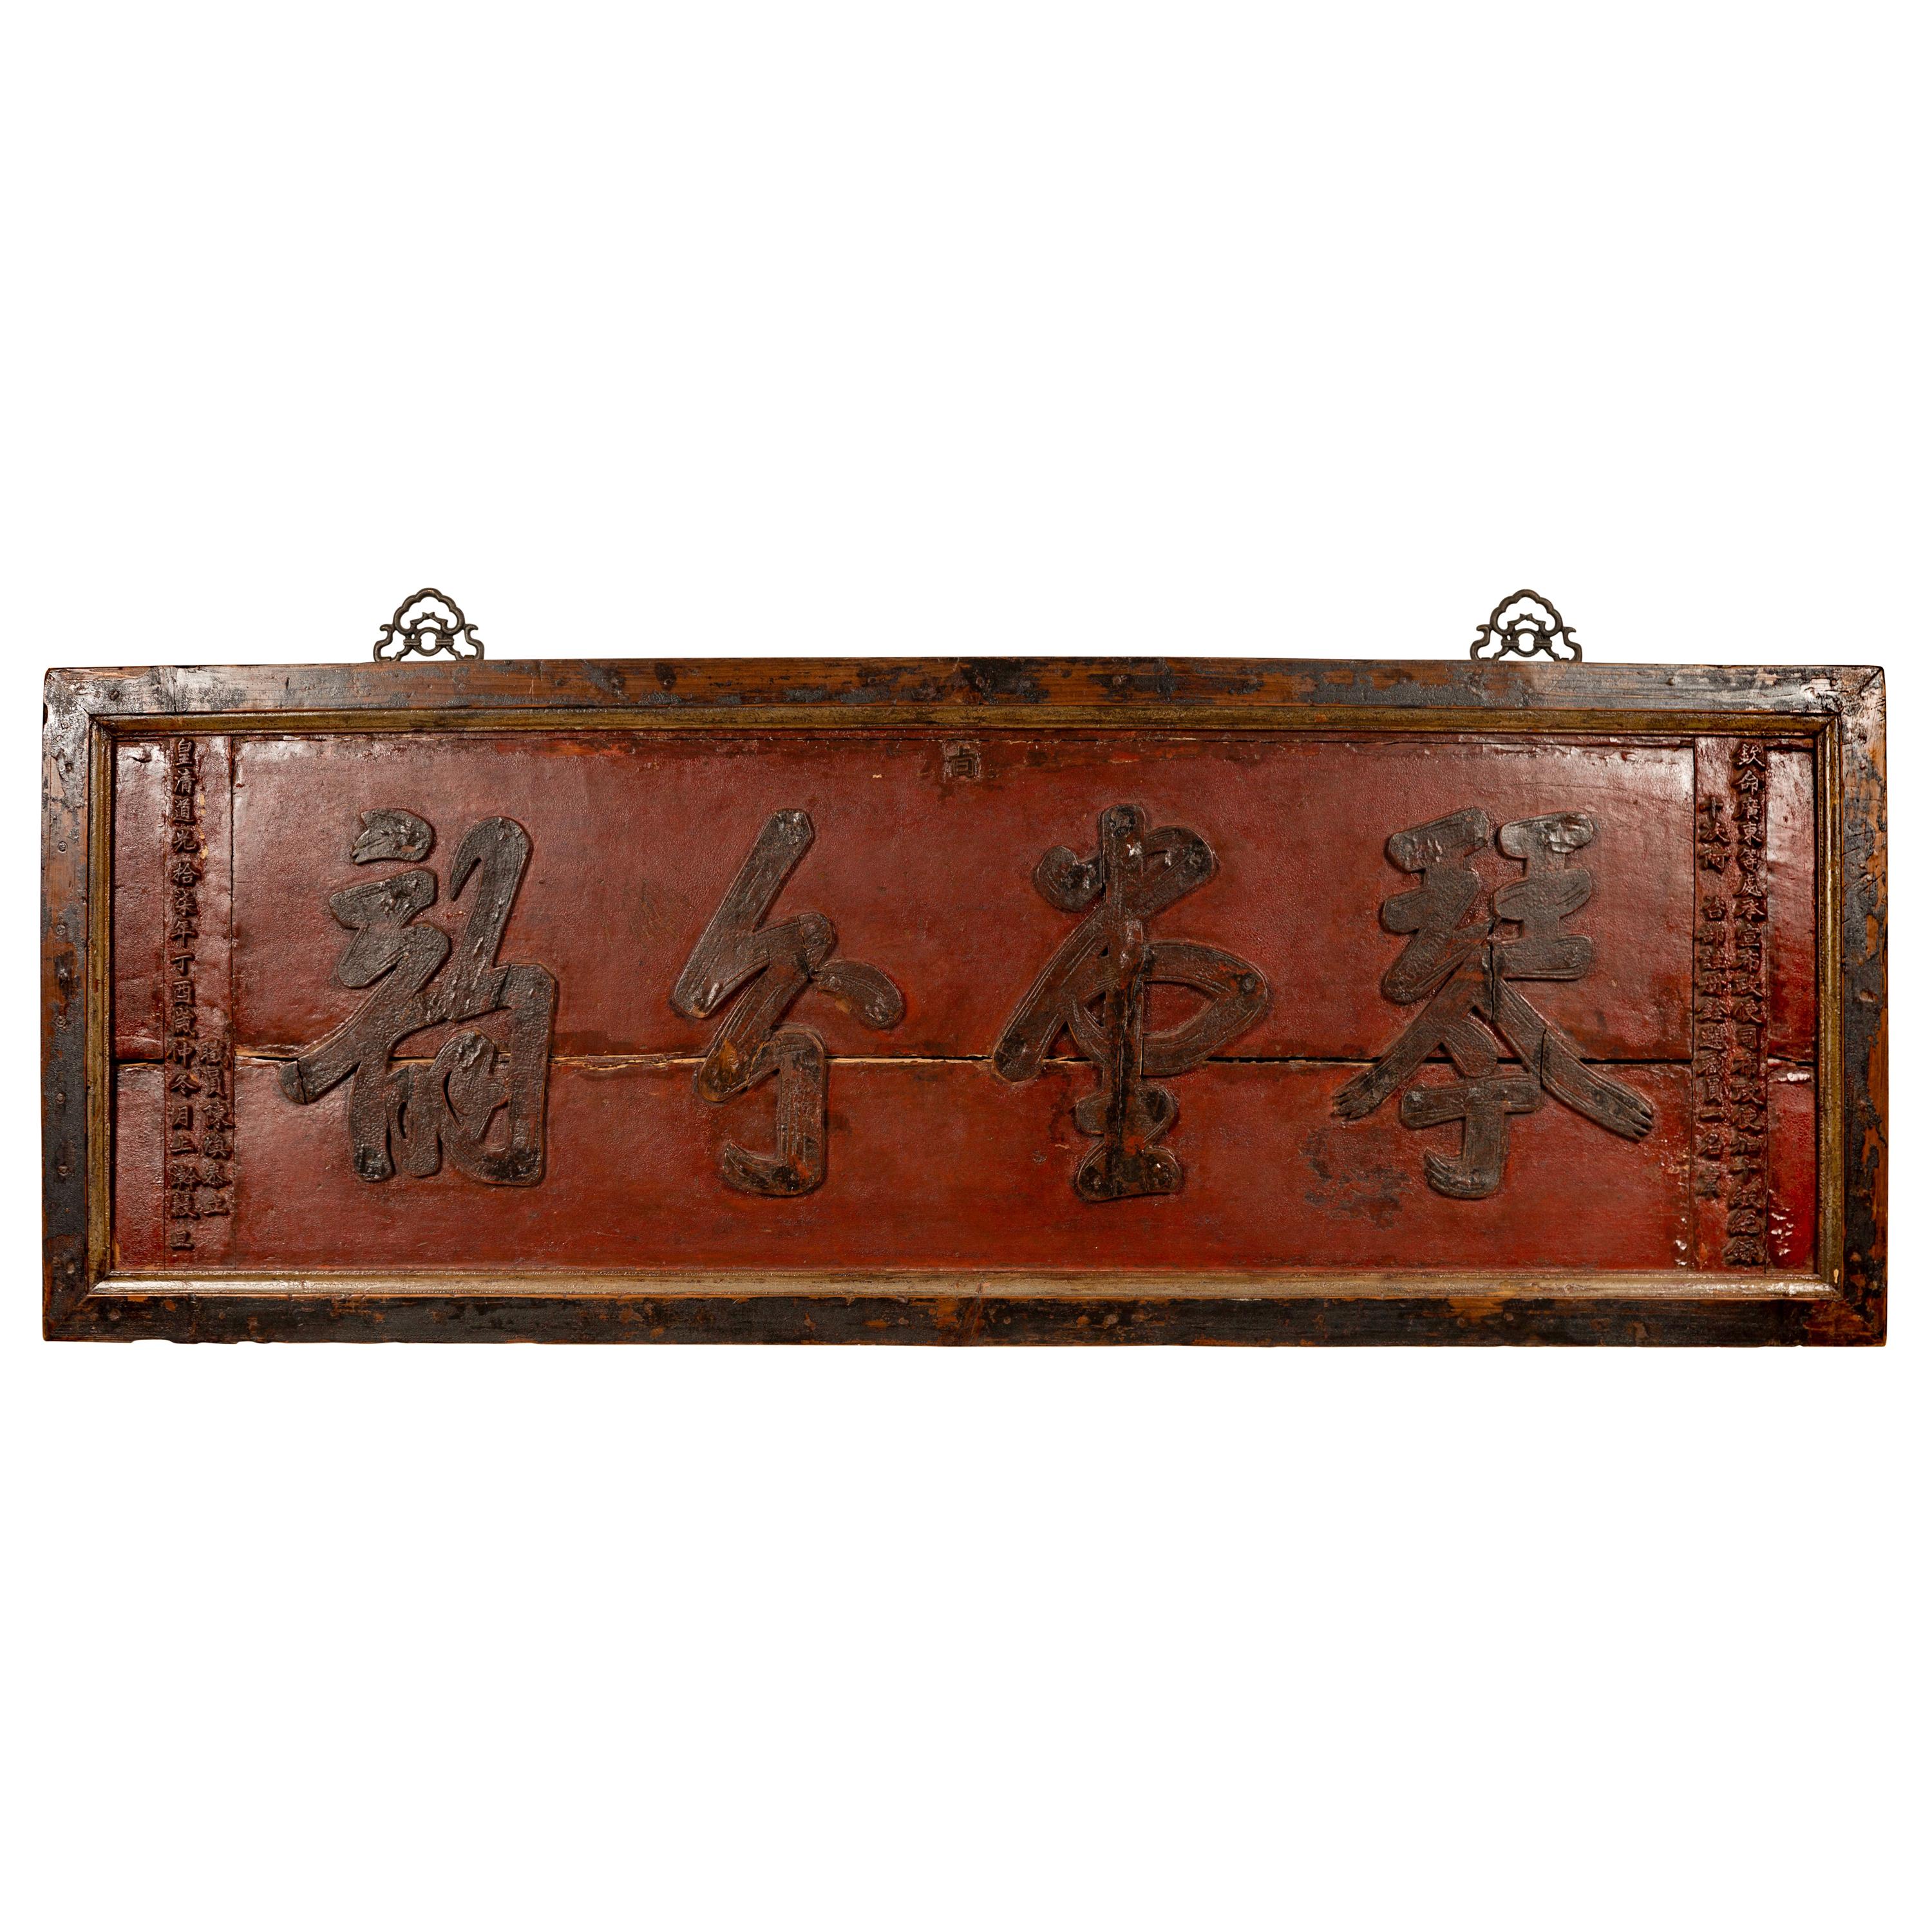 Large Antique Chinese Red Lacquered Wooden Shop Sign with Black Calligraphy